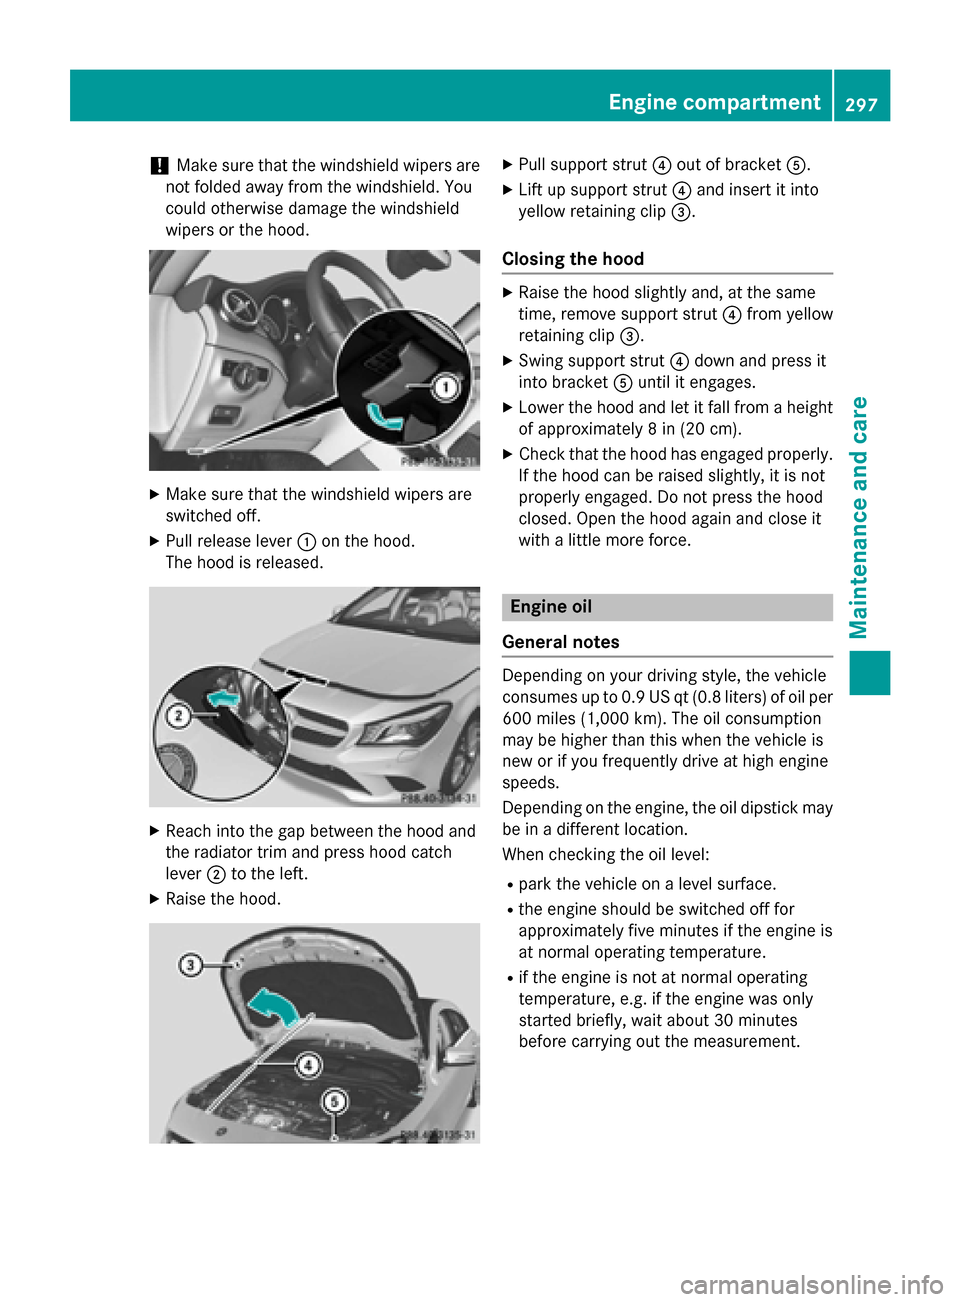 MERCEDES-BENZ CLA-Class 2016 C117 Owners Manual !Make sure that the windshield wipers are
not folded away from the windshield. You
could otherwise damage the windshield
wipers or the hood.
XMake sure that the windshield wipers are
switched off.
XPu